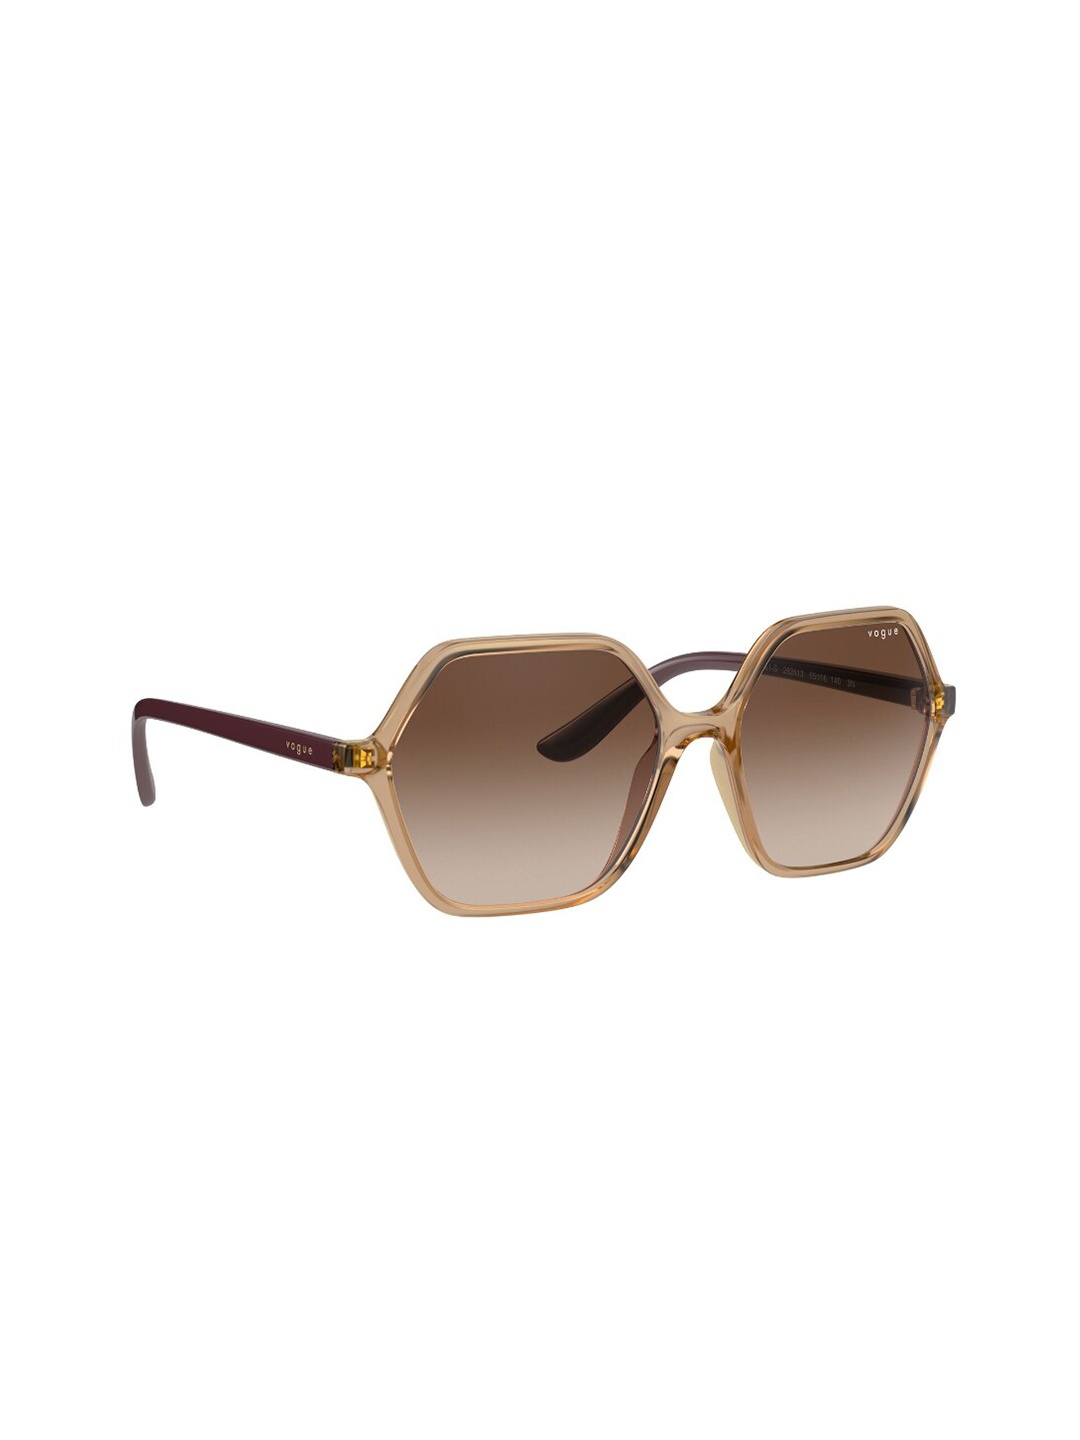 

vogue Women Oversized Sunglasses With UV Protected Lens, Brown